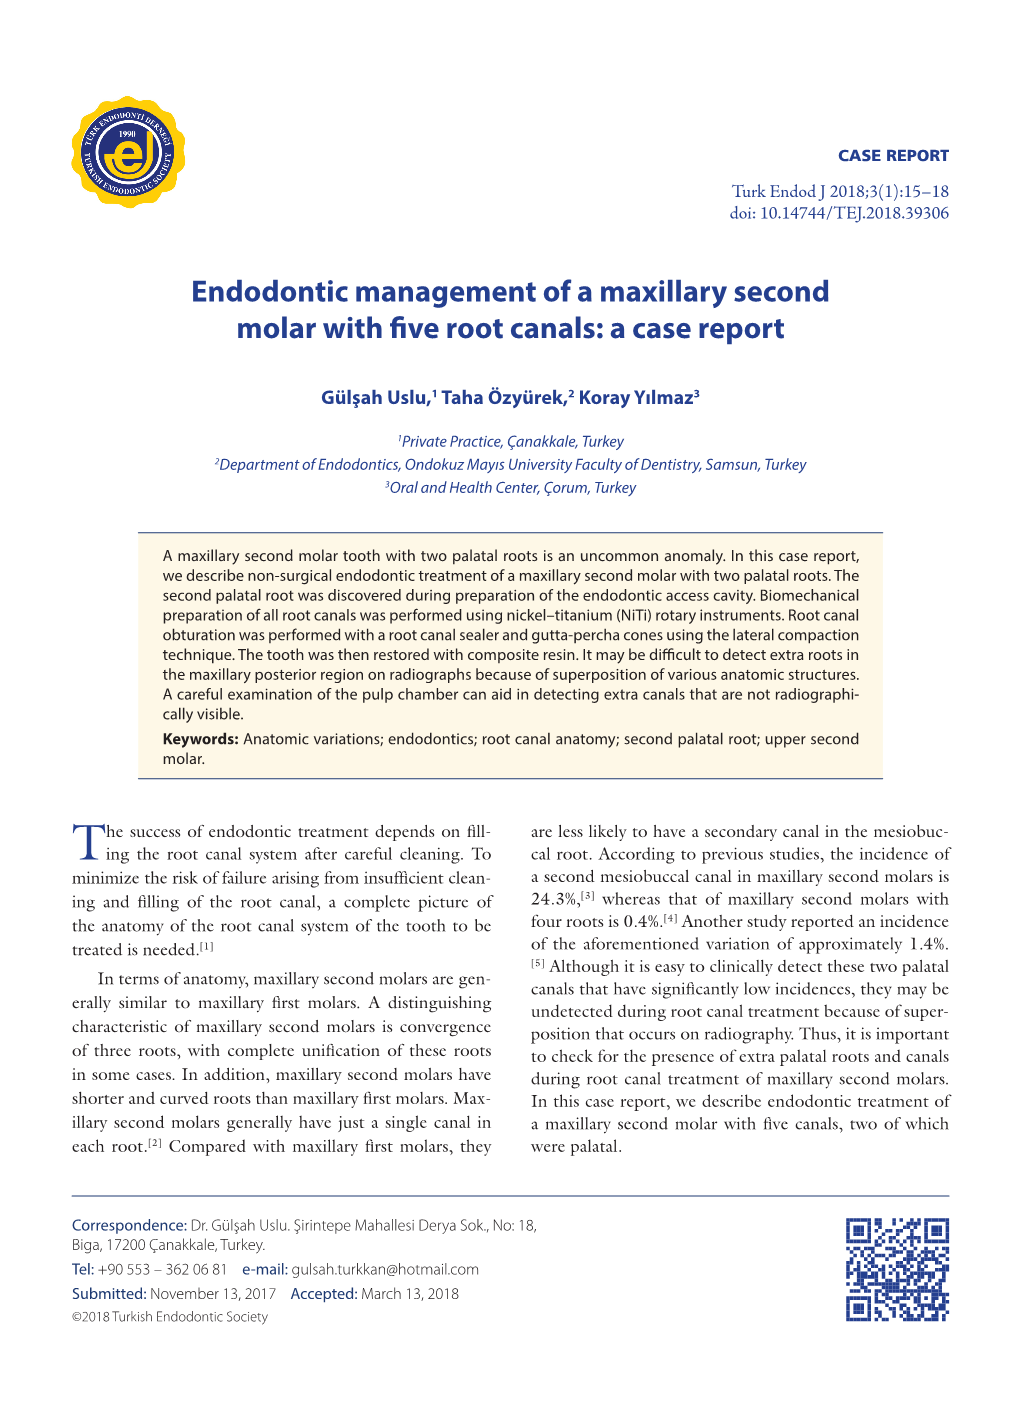 Endodontic Management of a Maxillary Second Molar with Five Root Canals: a Case Report